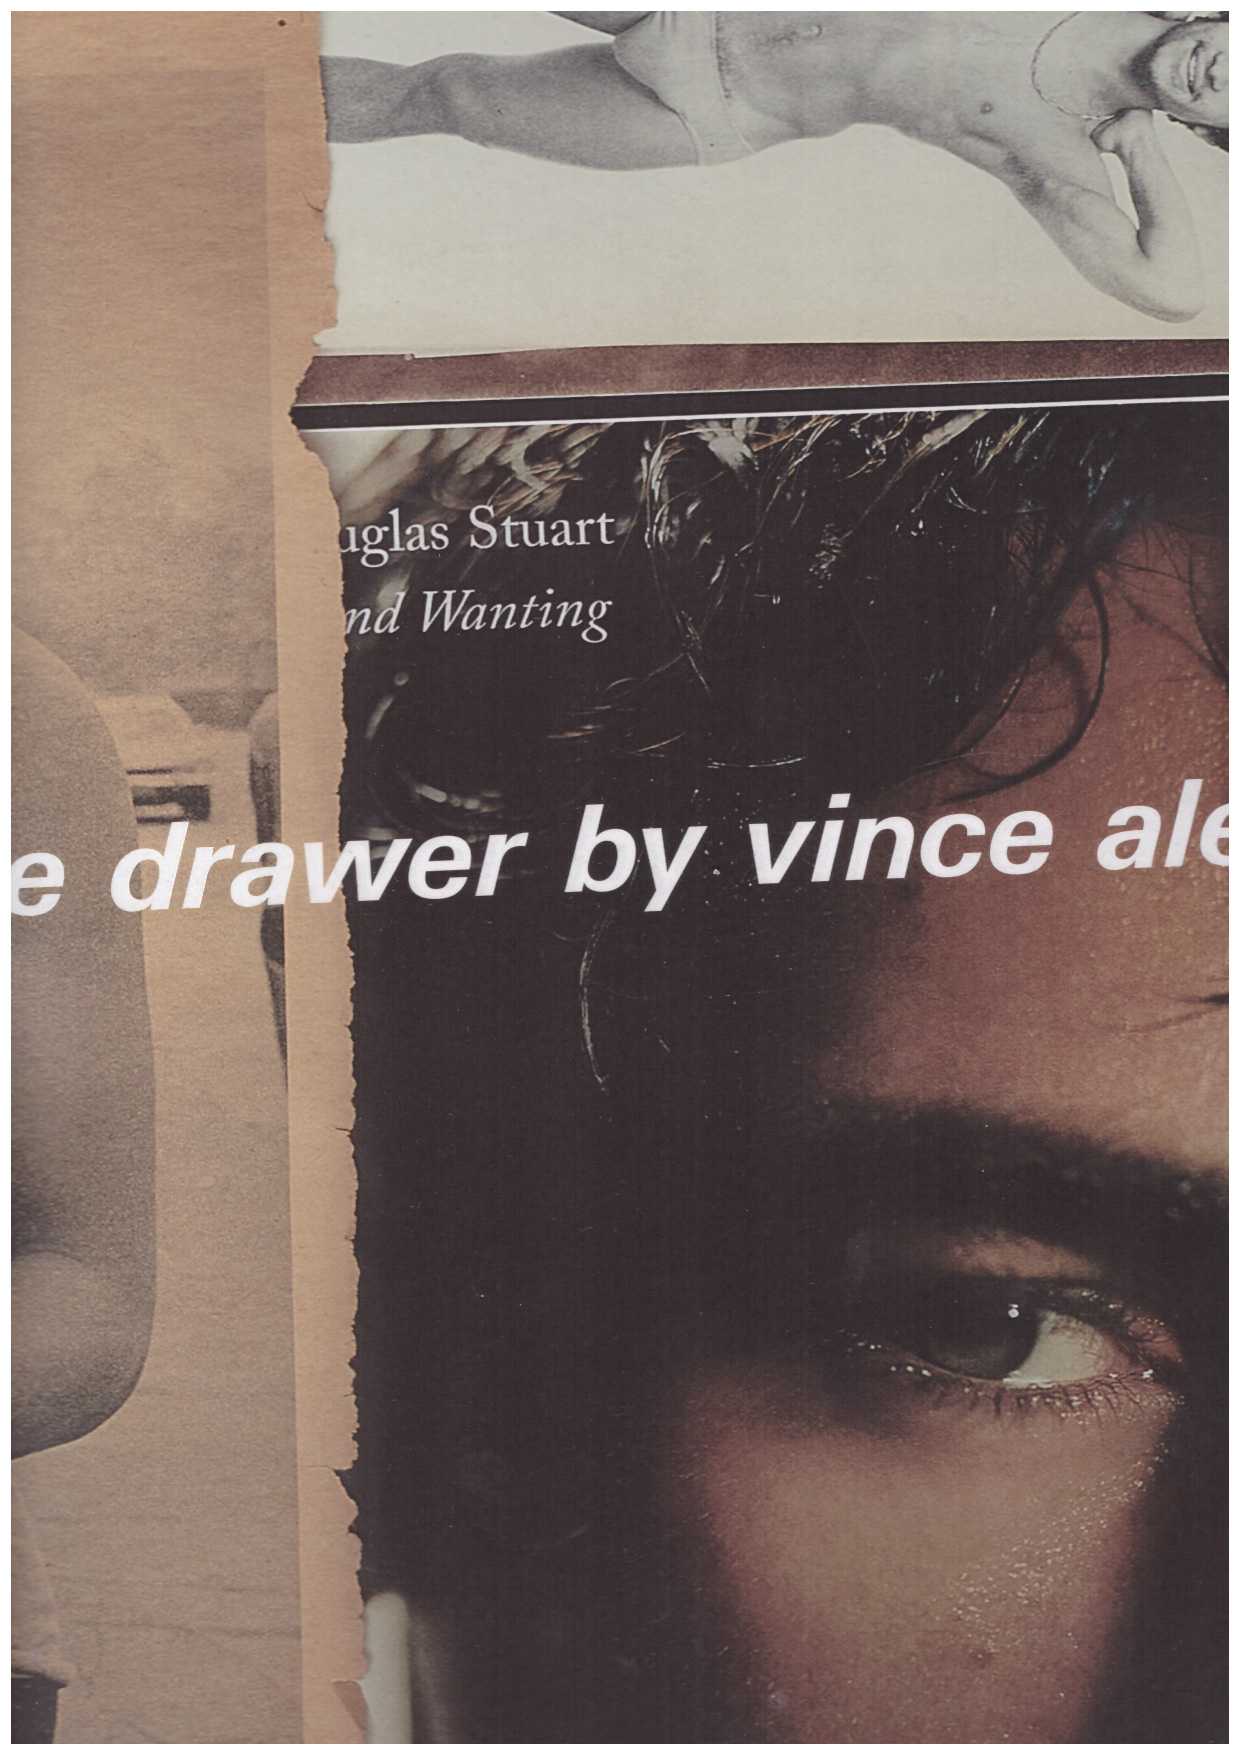 ALETTI, Vincent - The Drawer